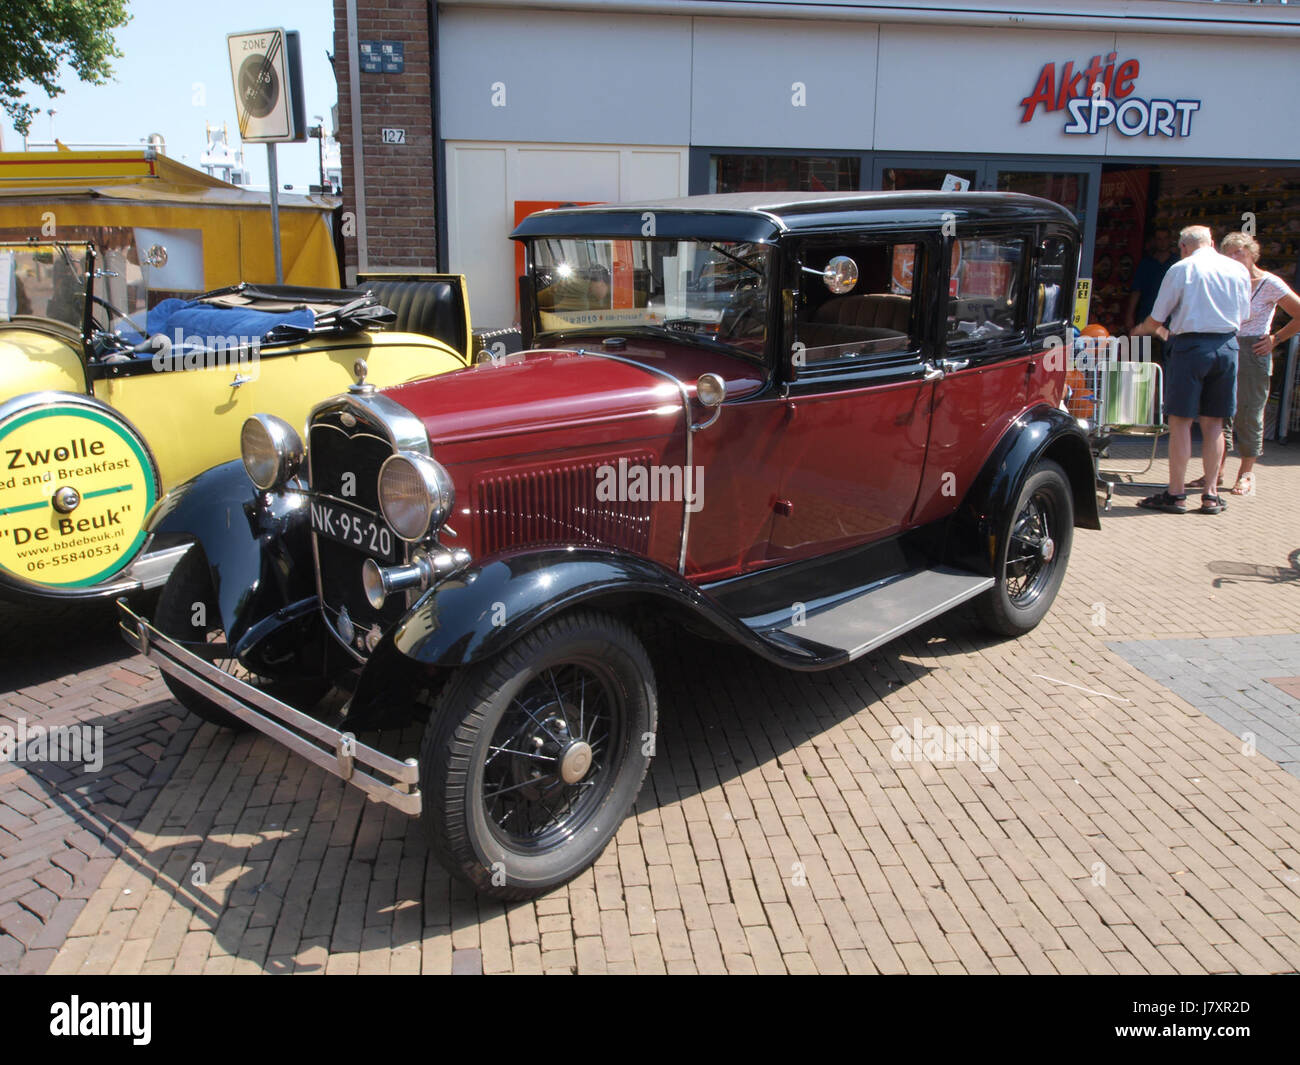 1952 Ford A NK 95 20 p1 Stockfoto